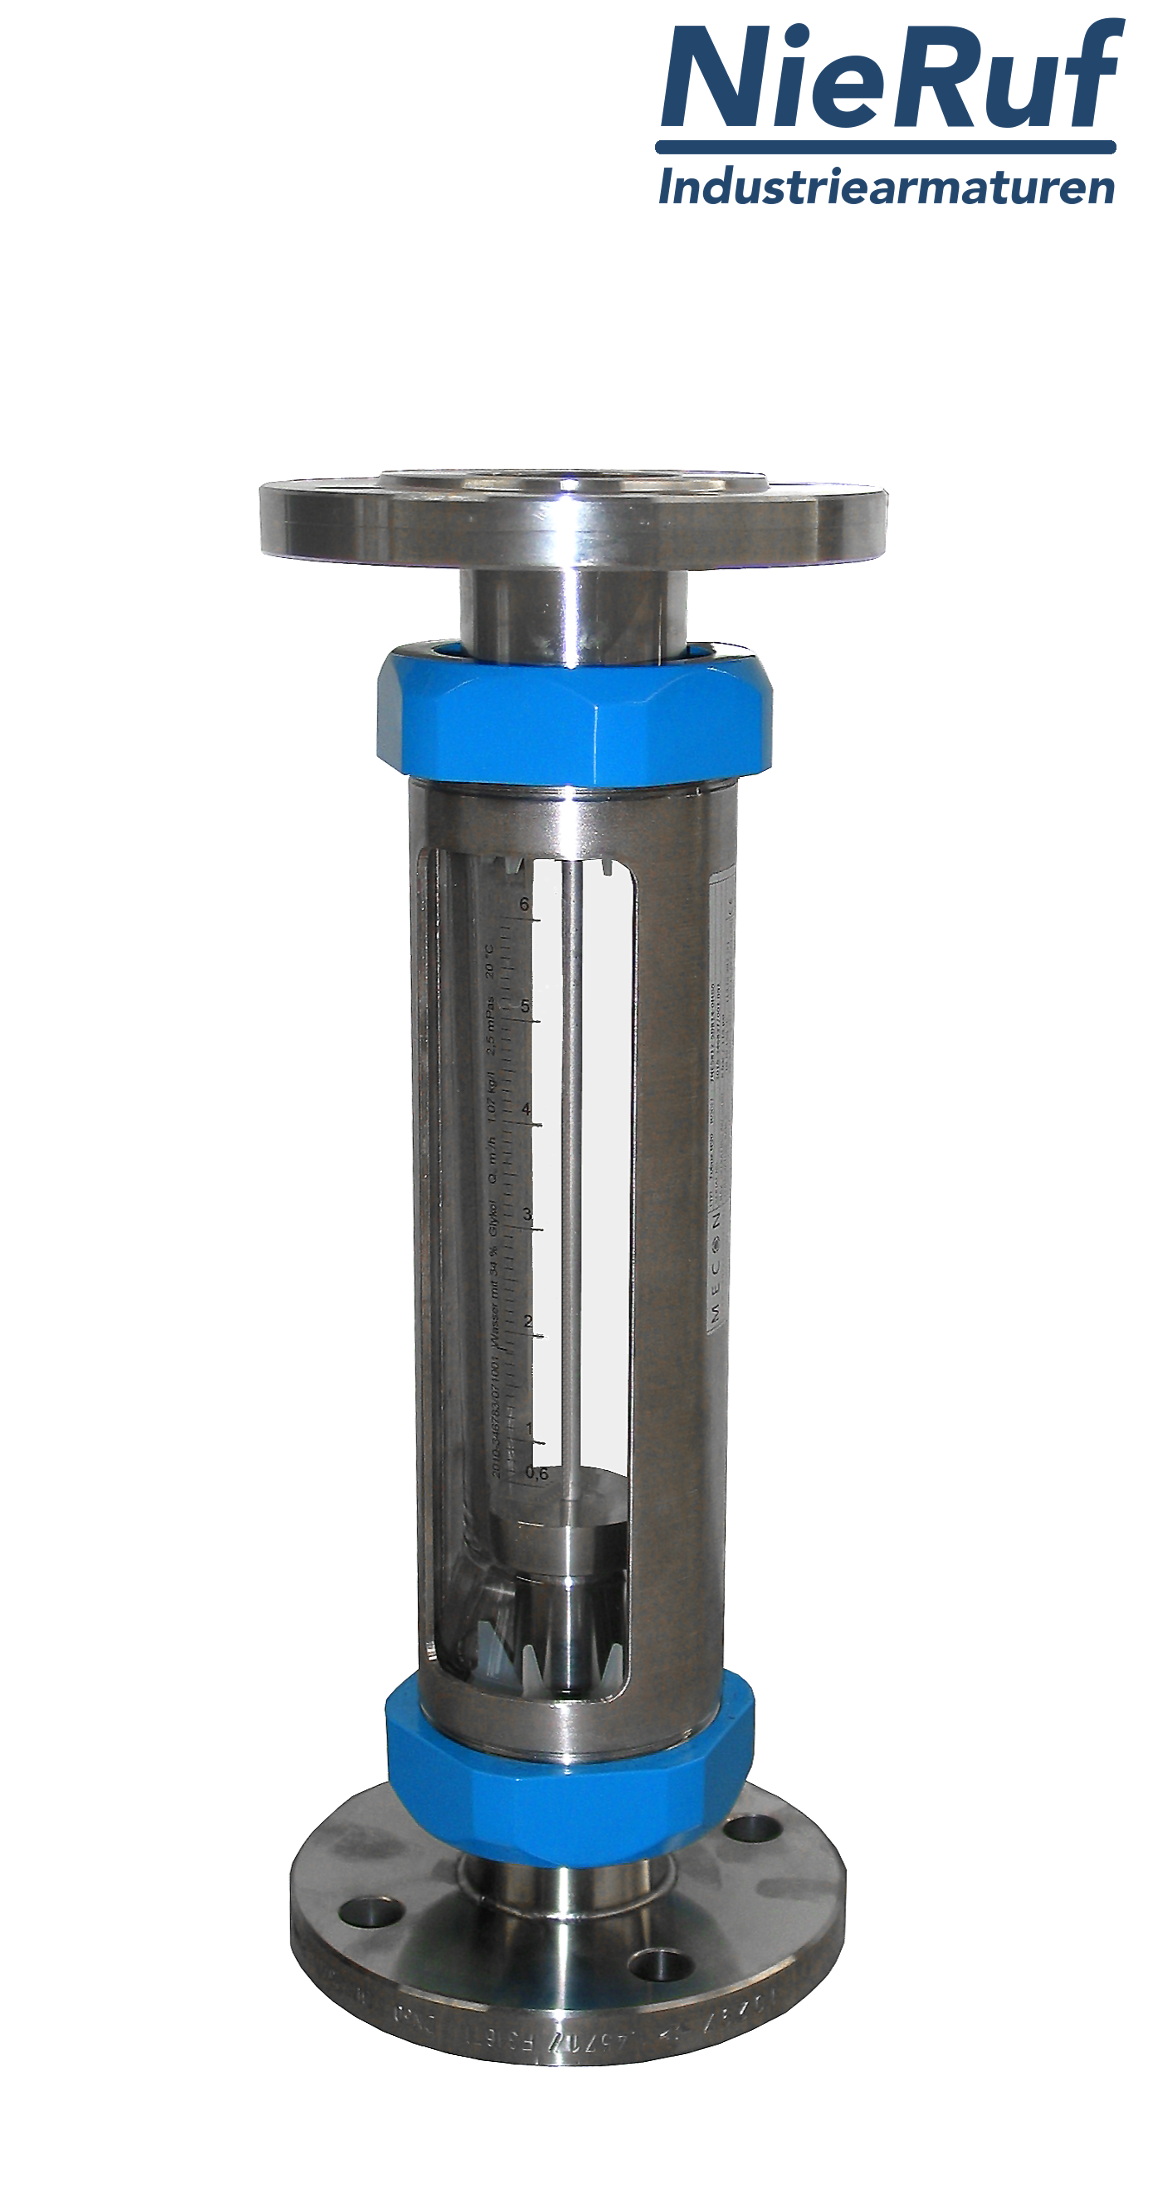 Variable area flowmeter stainless steel + borosilicate flange DN25 50.0 - 500.0 l/h water FKM